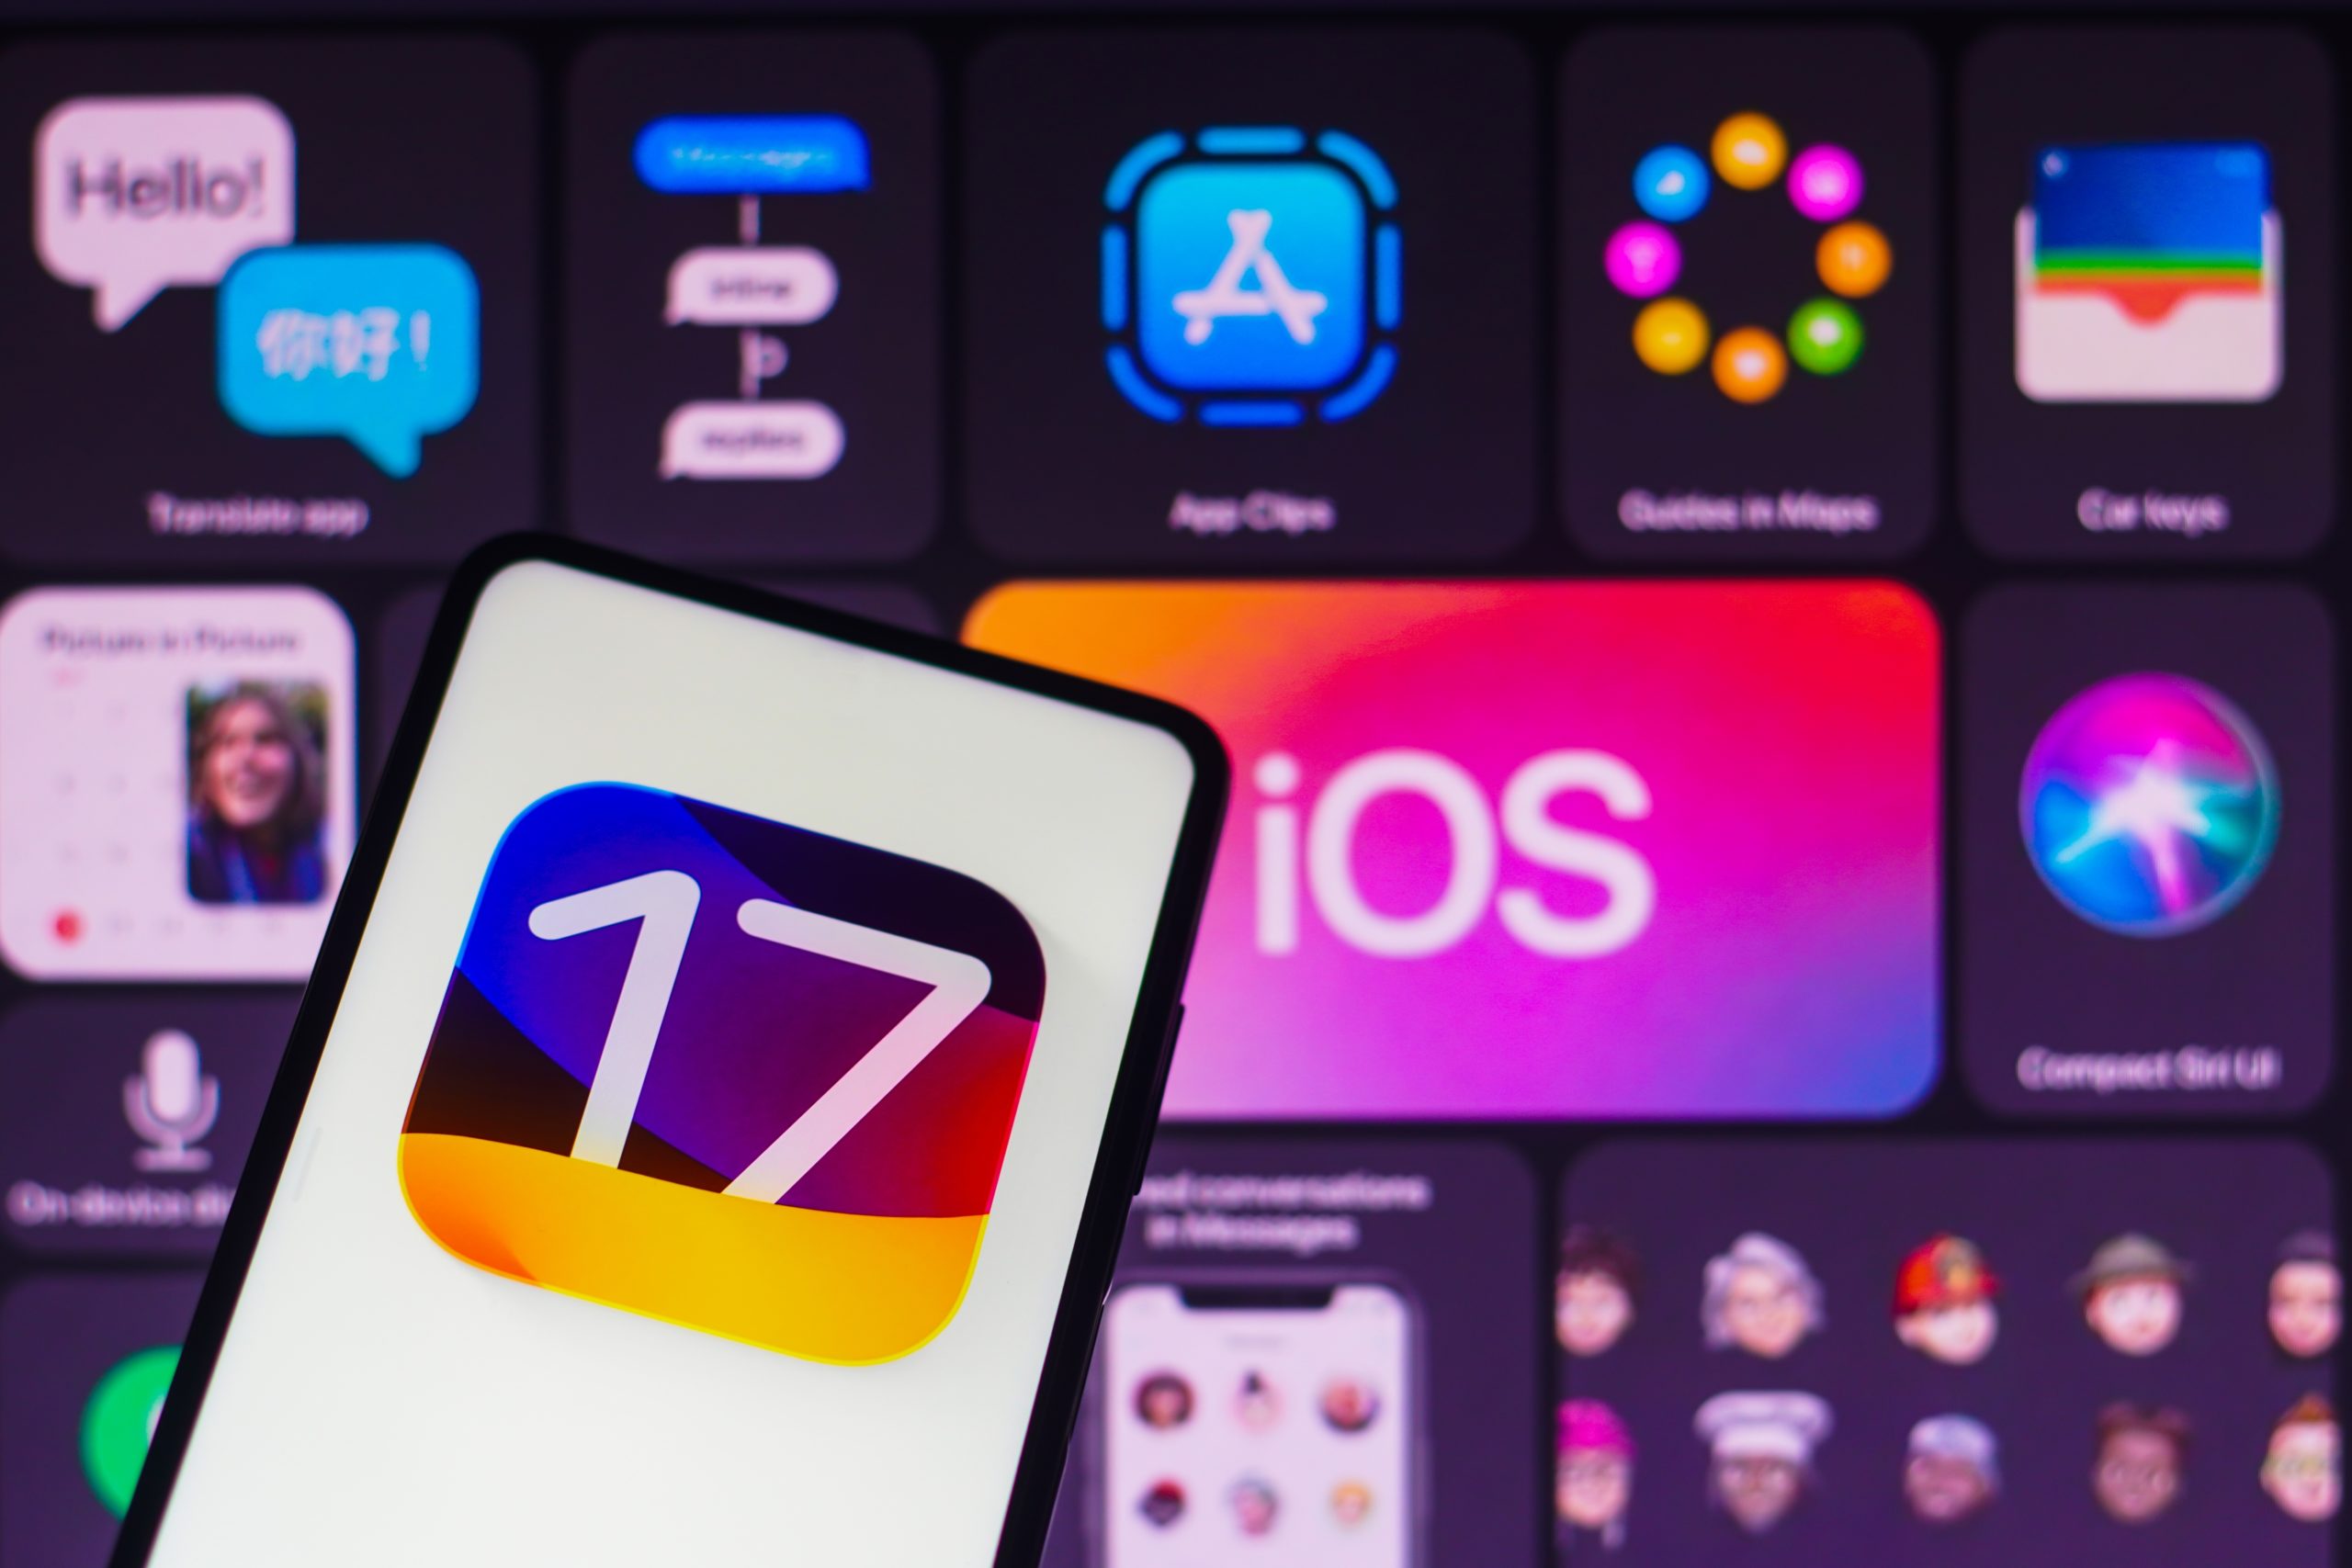 Split screen, dual apps, and more!  Here’s what to expect from iOS 17 in 2023